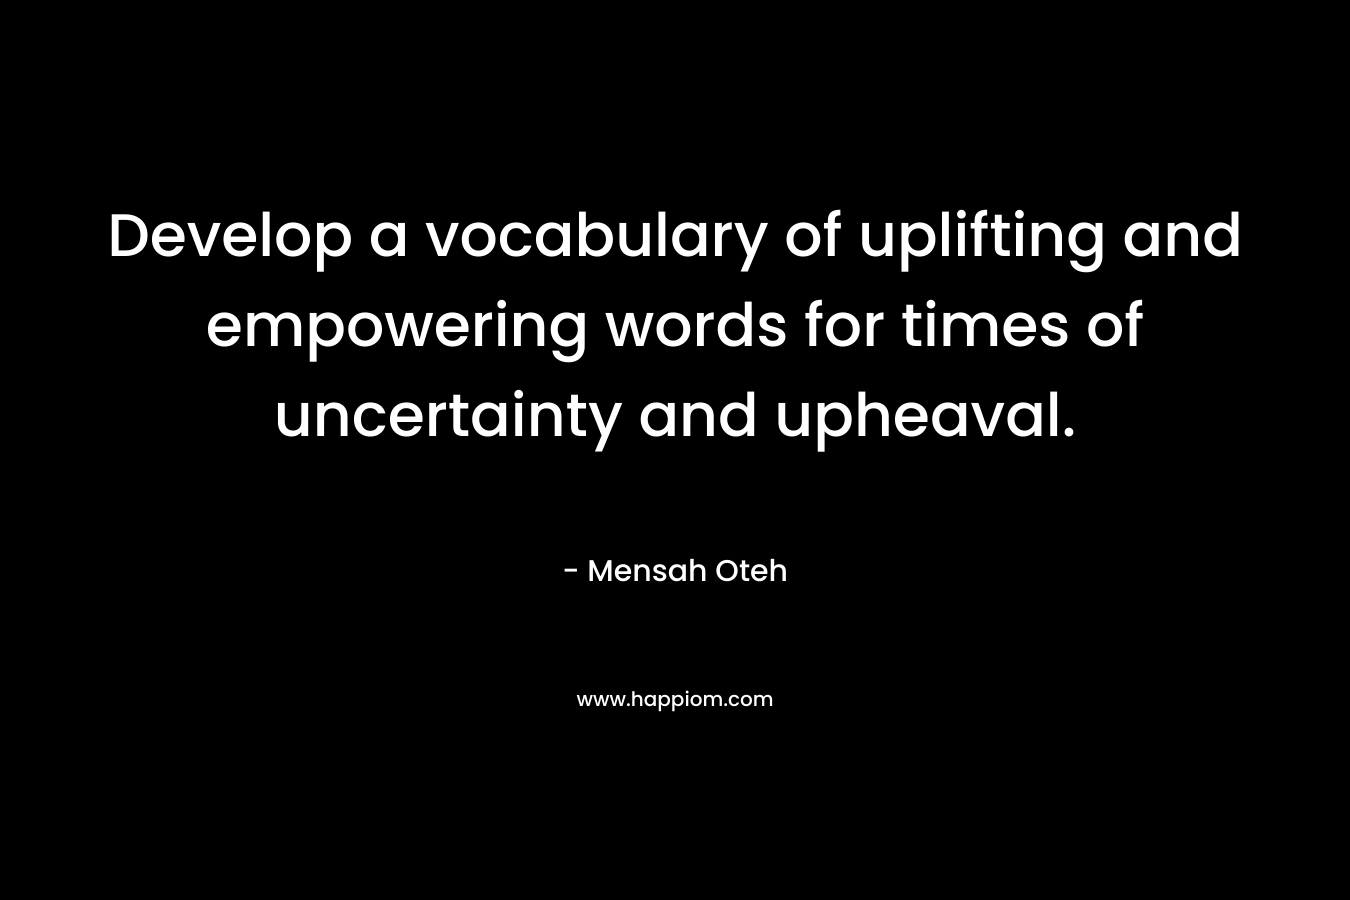 Develop a vocabulary of uplifting and empowering words for times of uncertainty and upheaval.